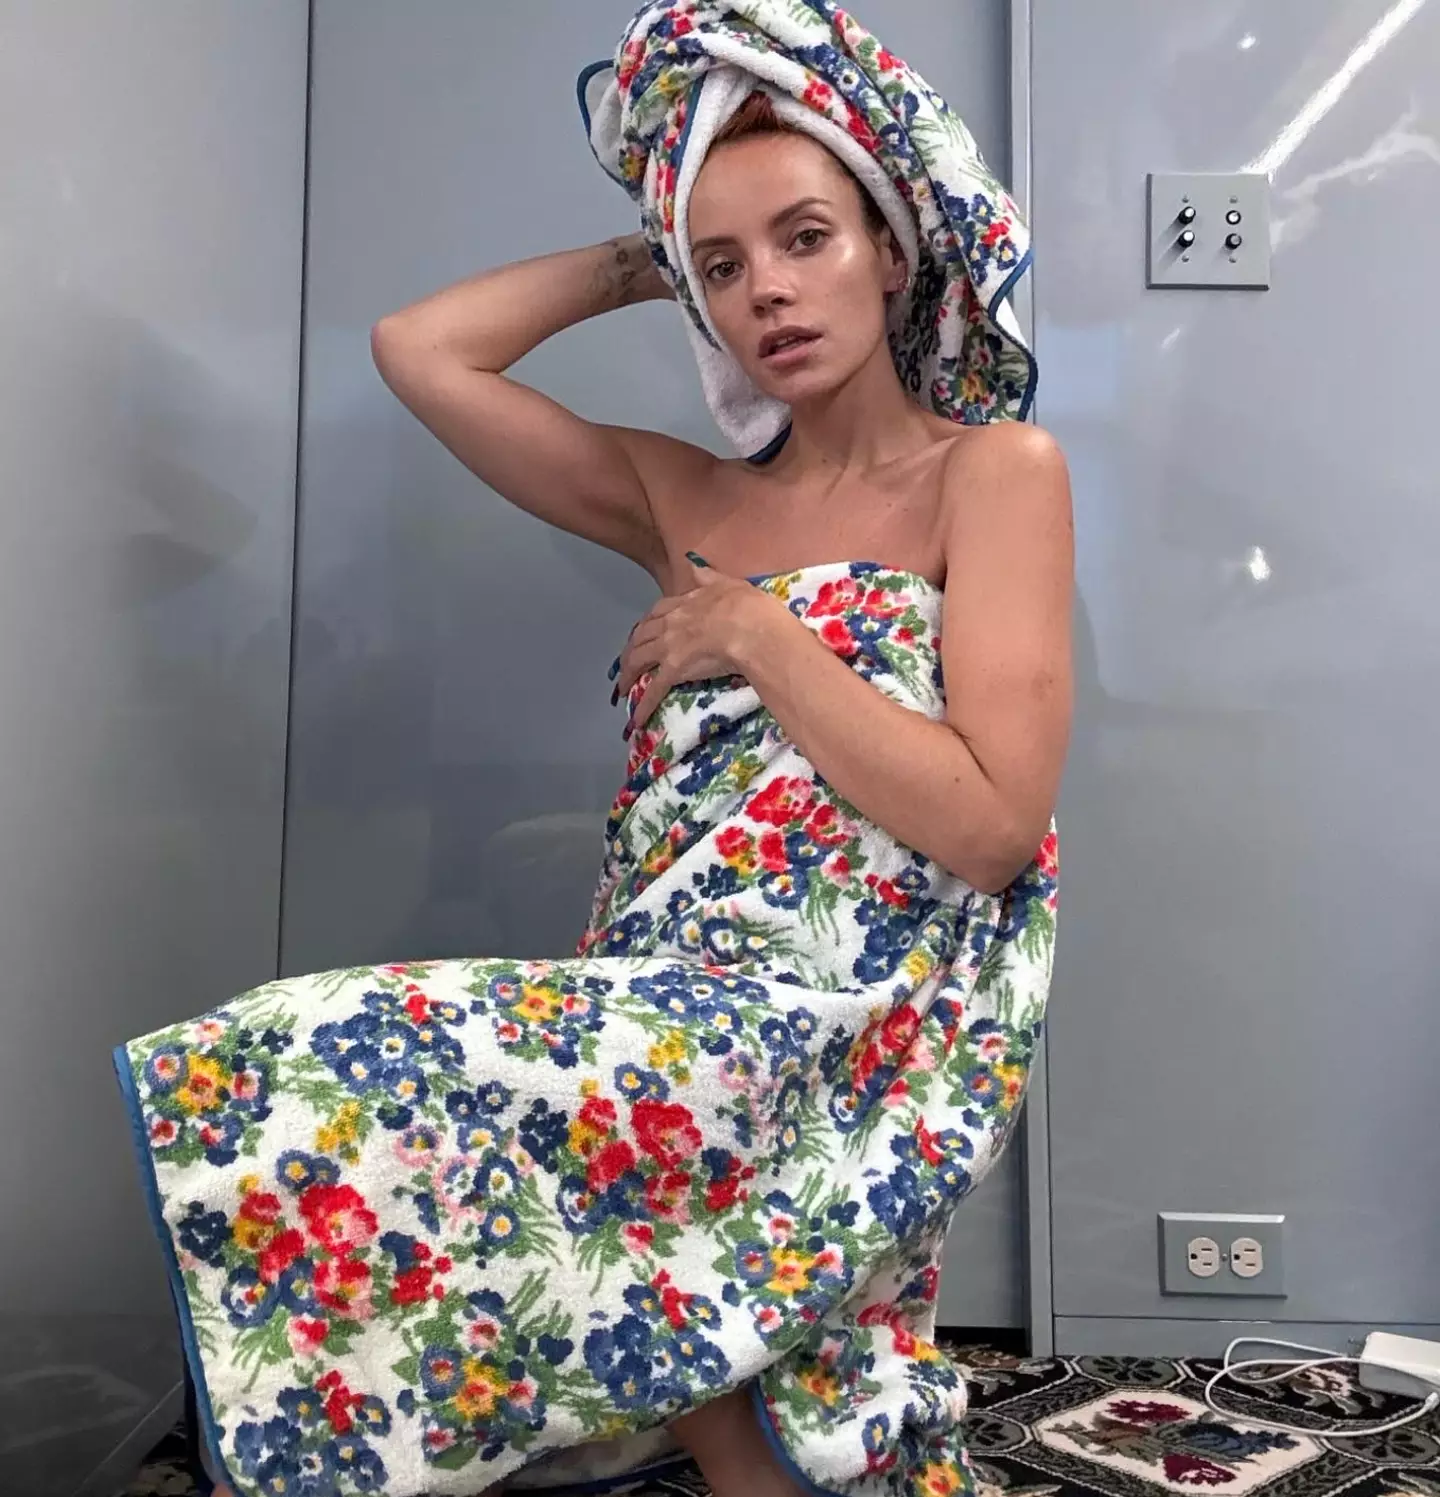 The singer has admitted there's a fair bit of porn in her phone history. (Instagram/@lilyallen)